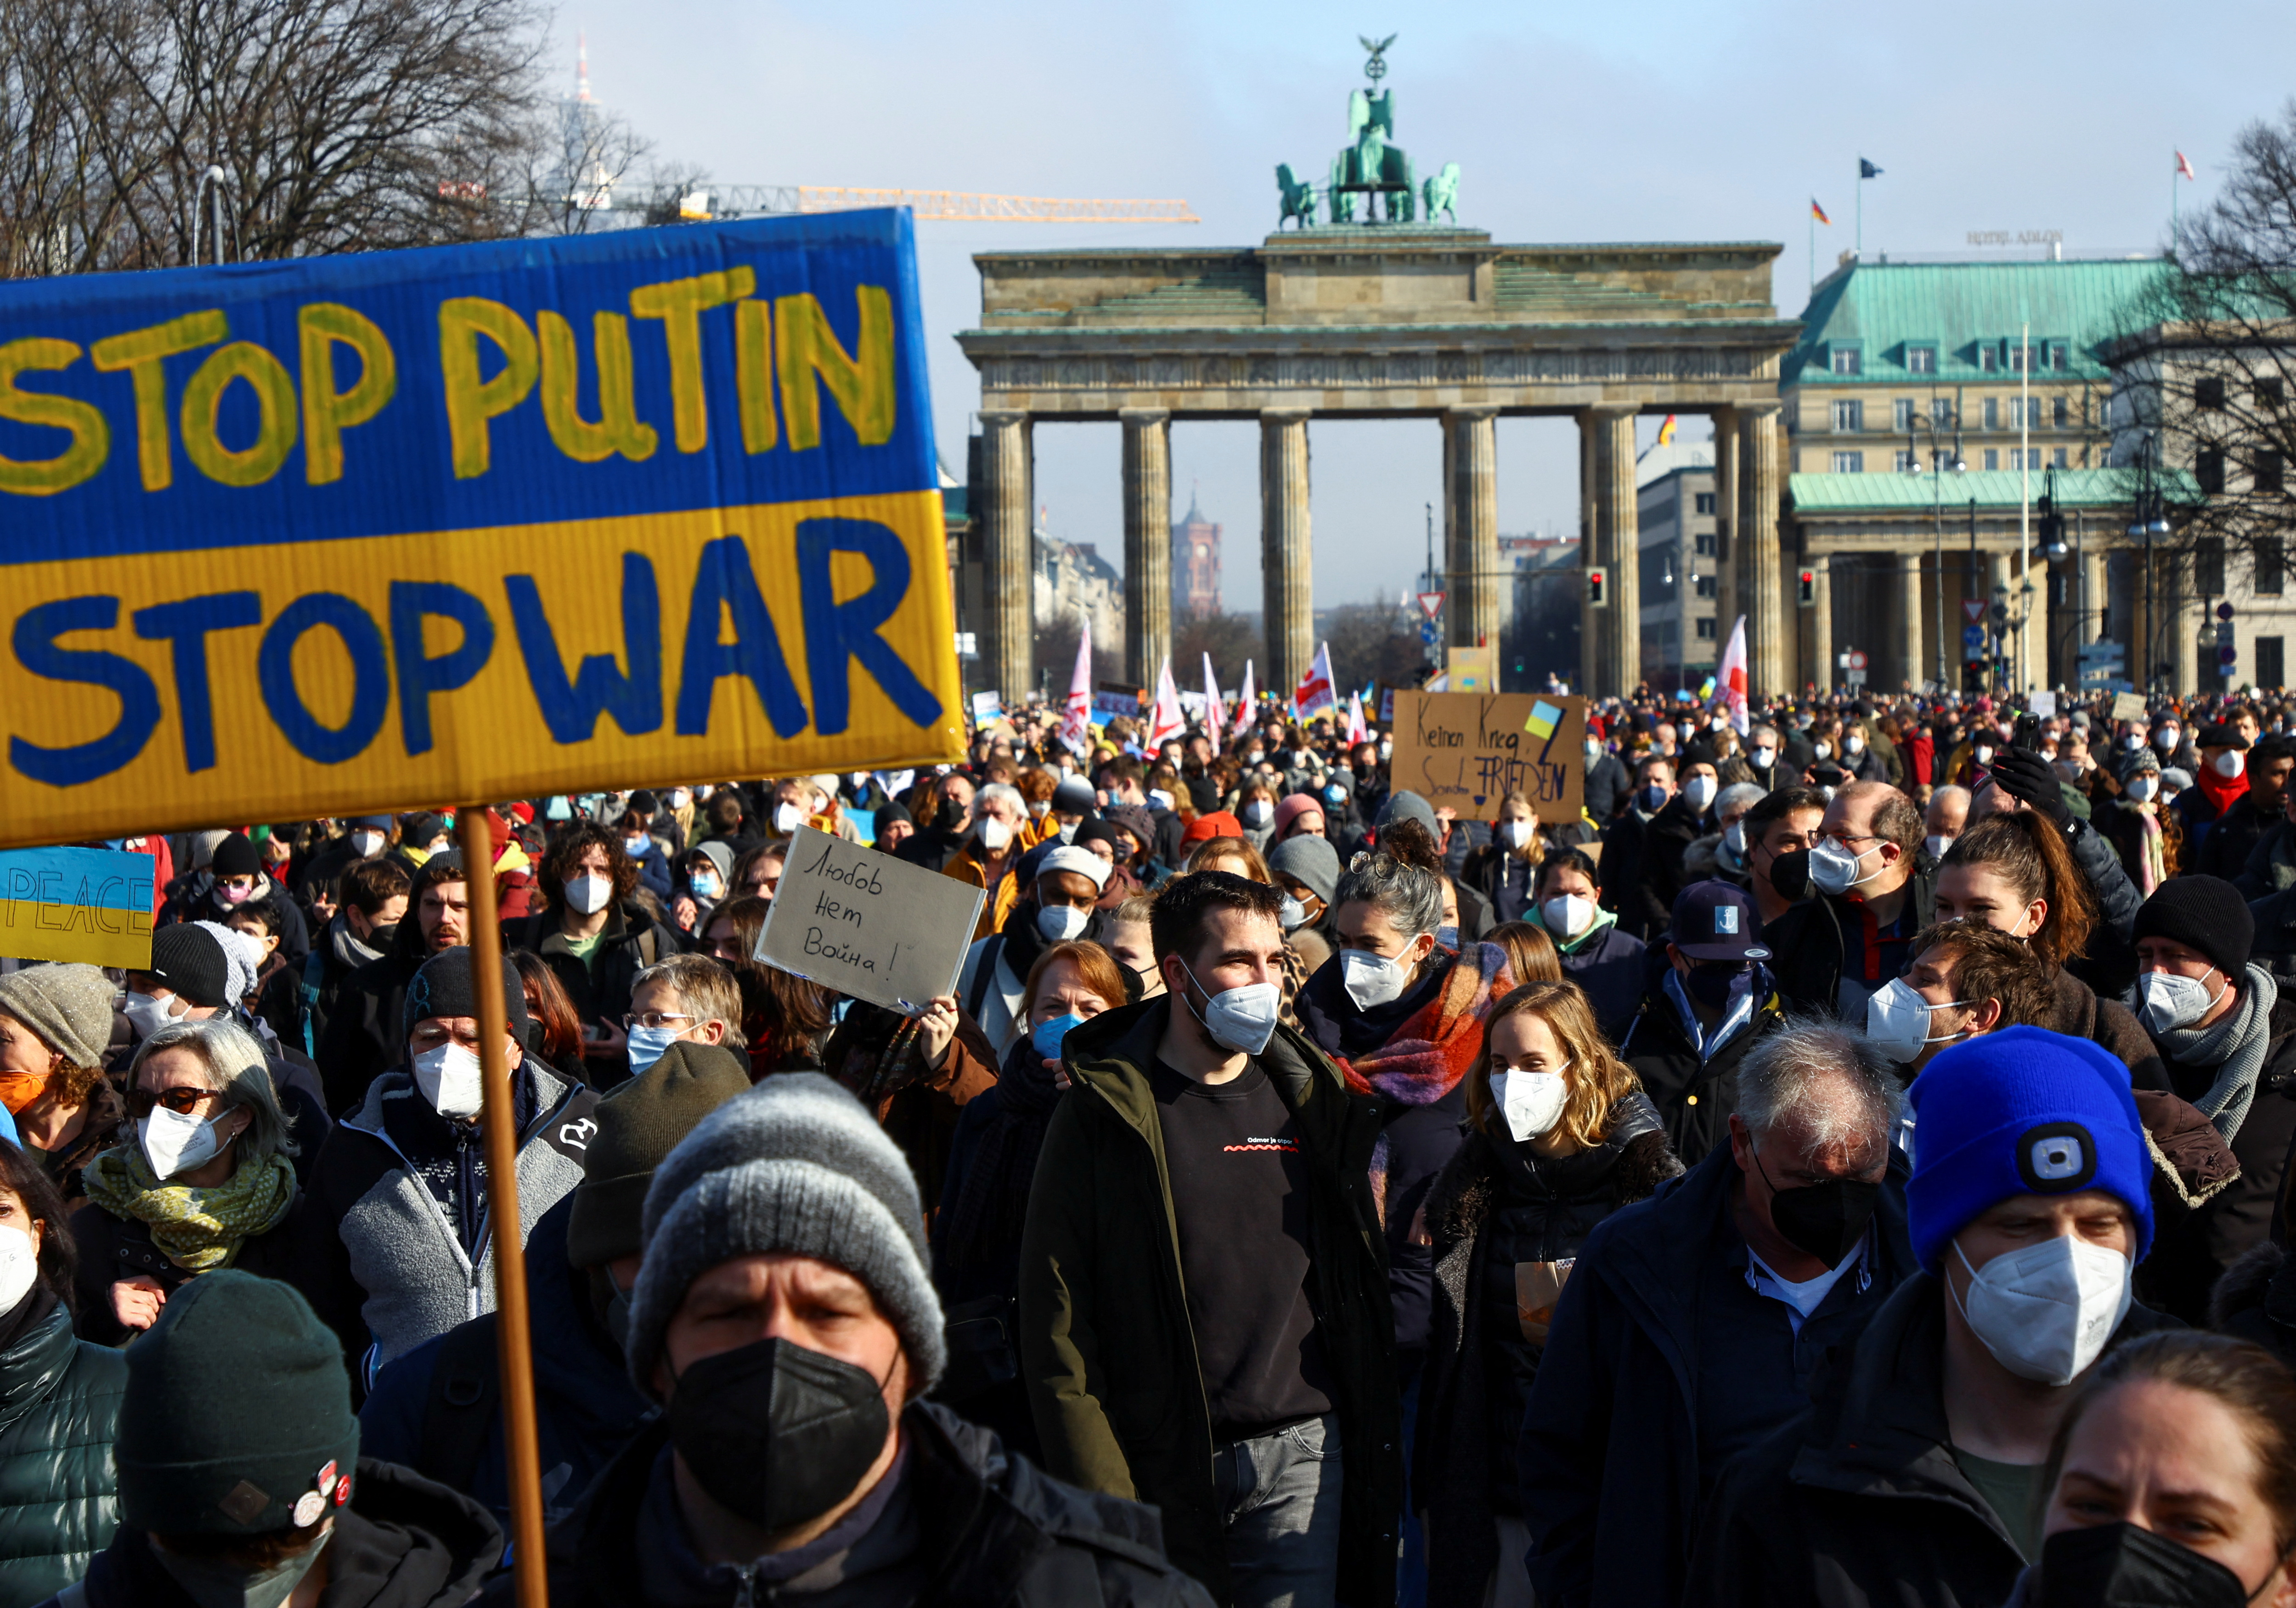 Demonstrators march during an anti-war protest, after Russia launched a massive military operation against Ukraine, outside the Brandenburg Gate in Berlin, Germany, February 27, 2022. REUTERS/Fabrizio Bensch